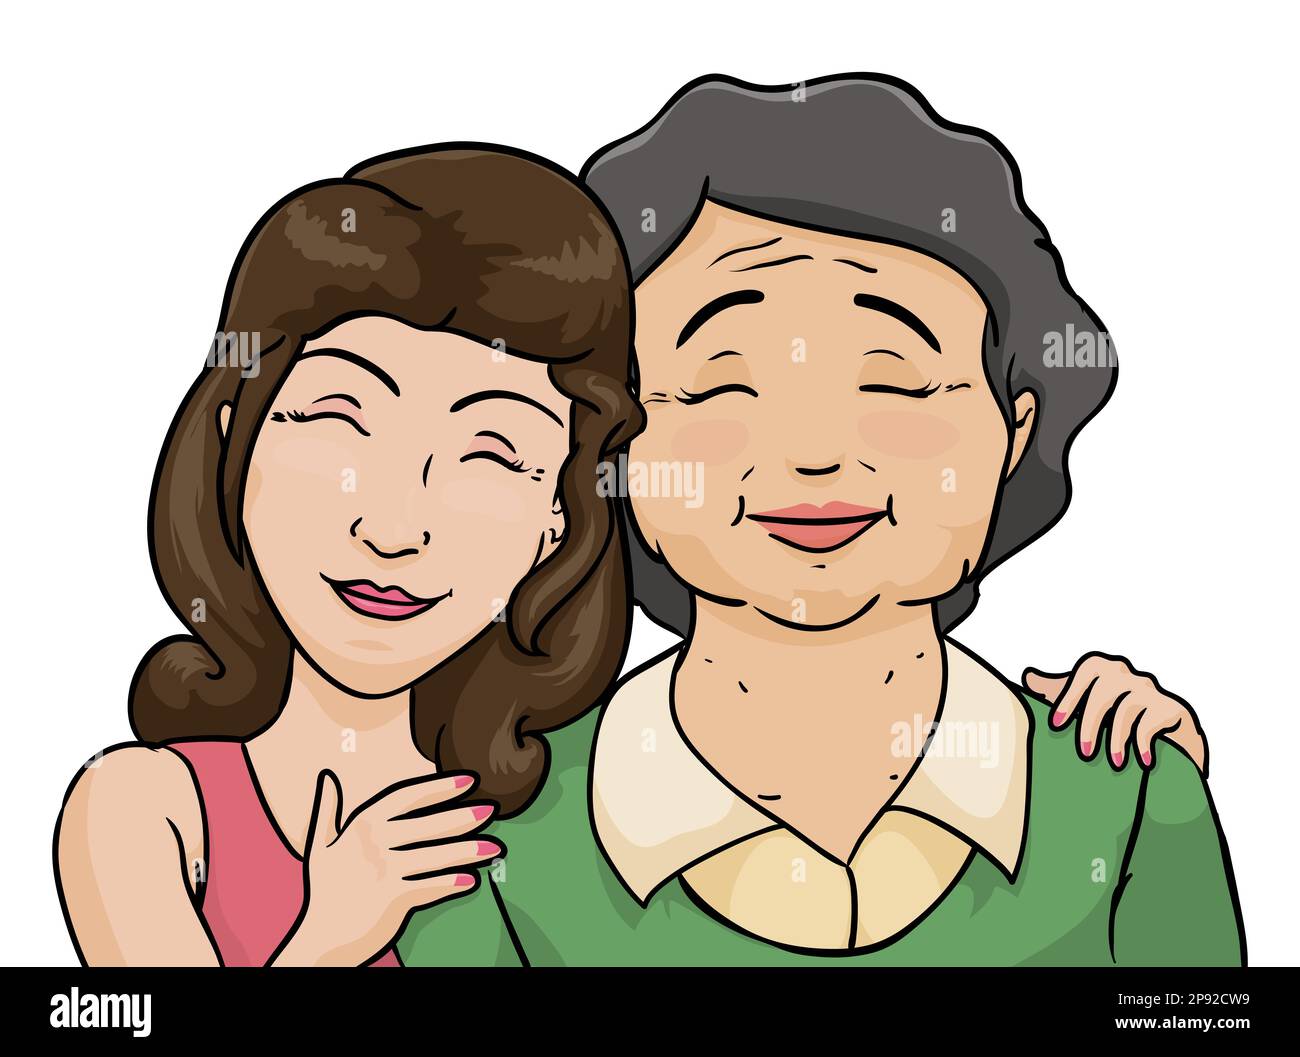 Cute scene with happy woman hugging older woman. Portrait of daughter and mother in cartoon style. Stock Vector